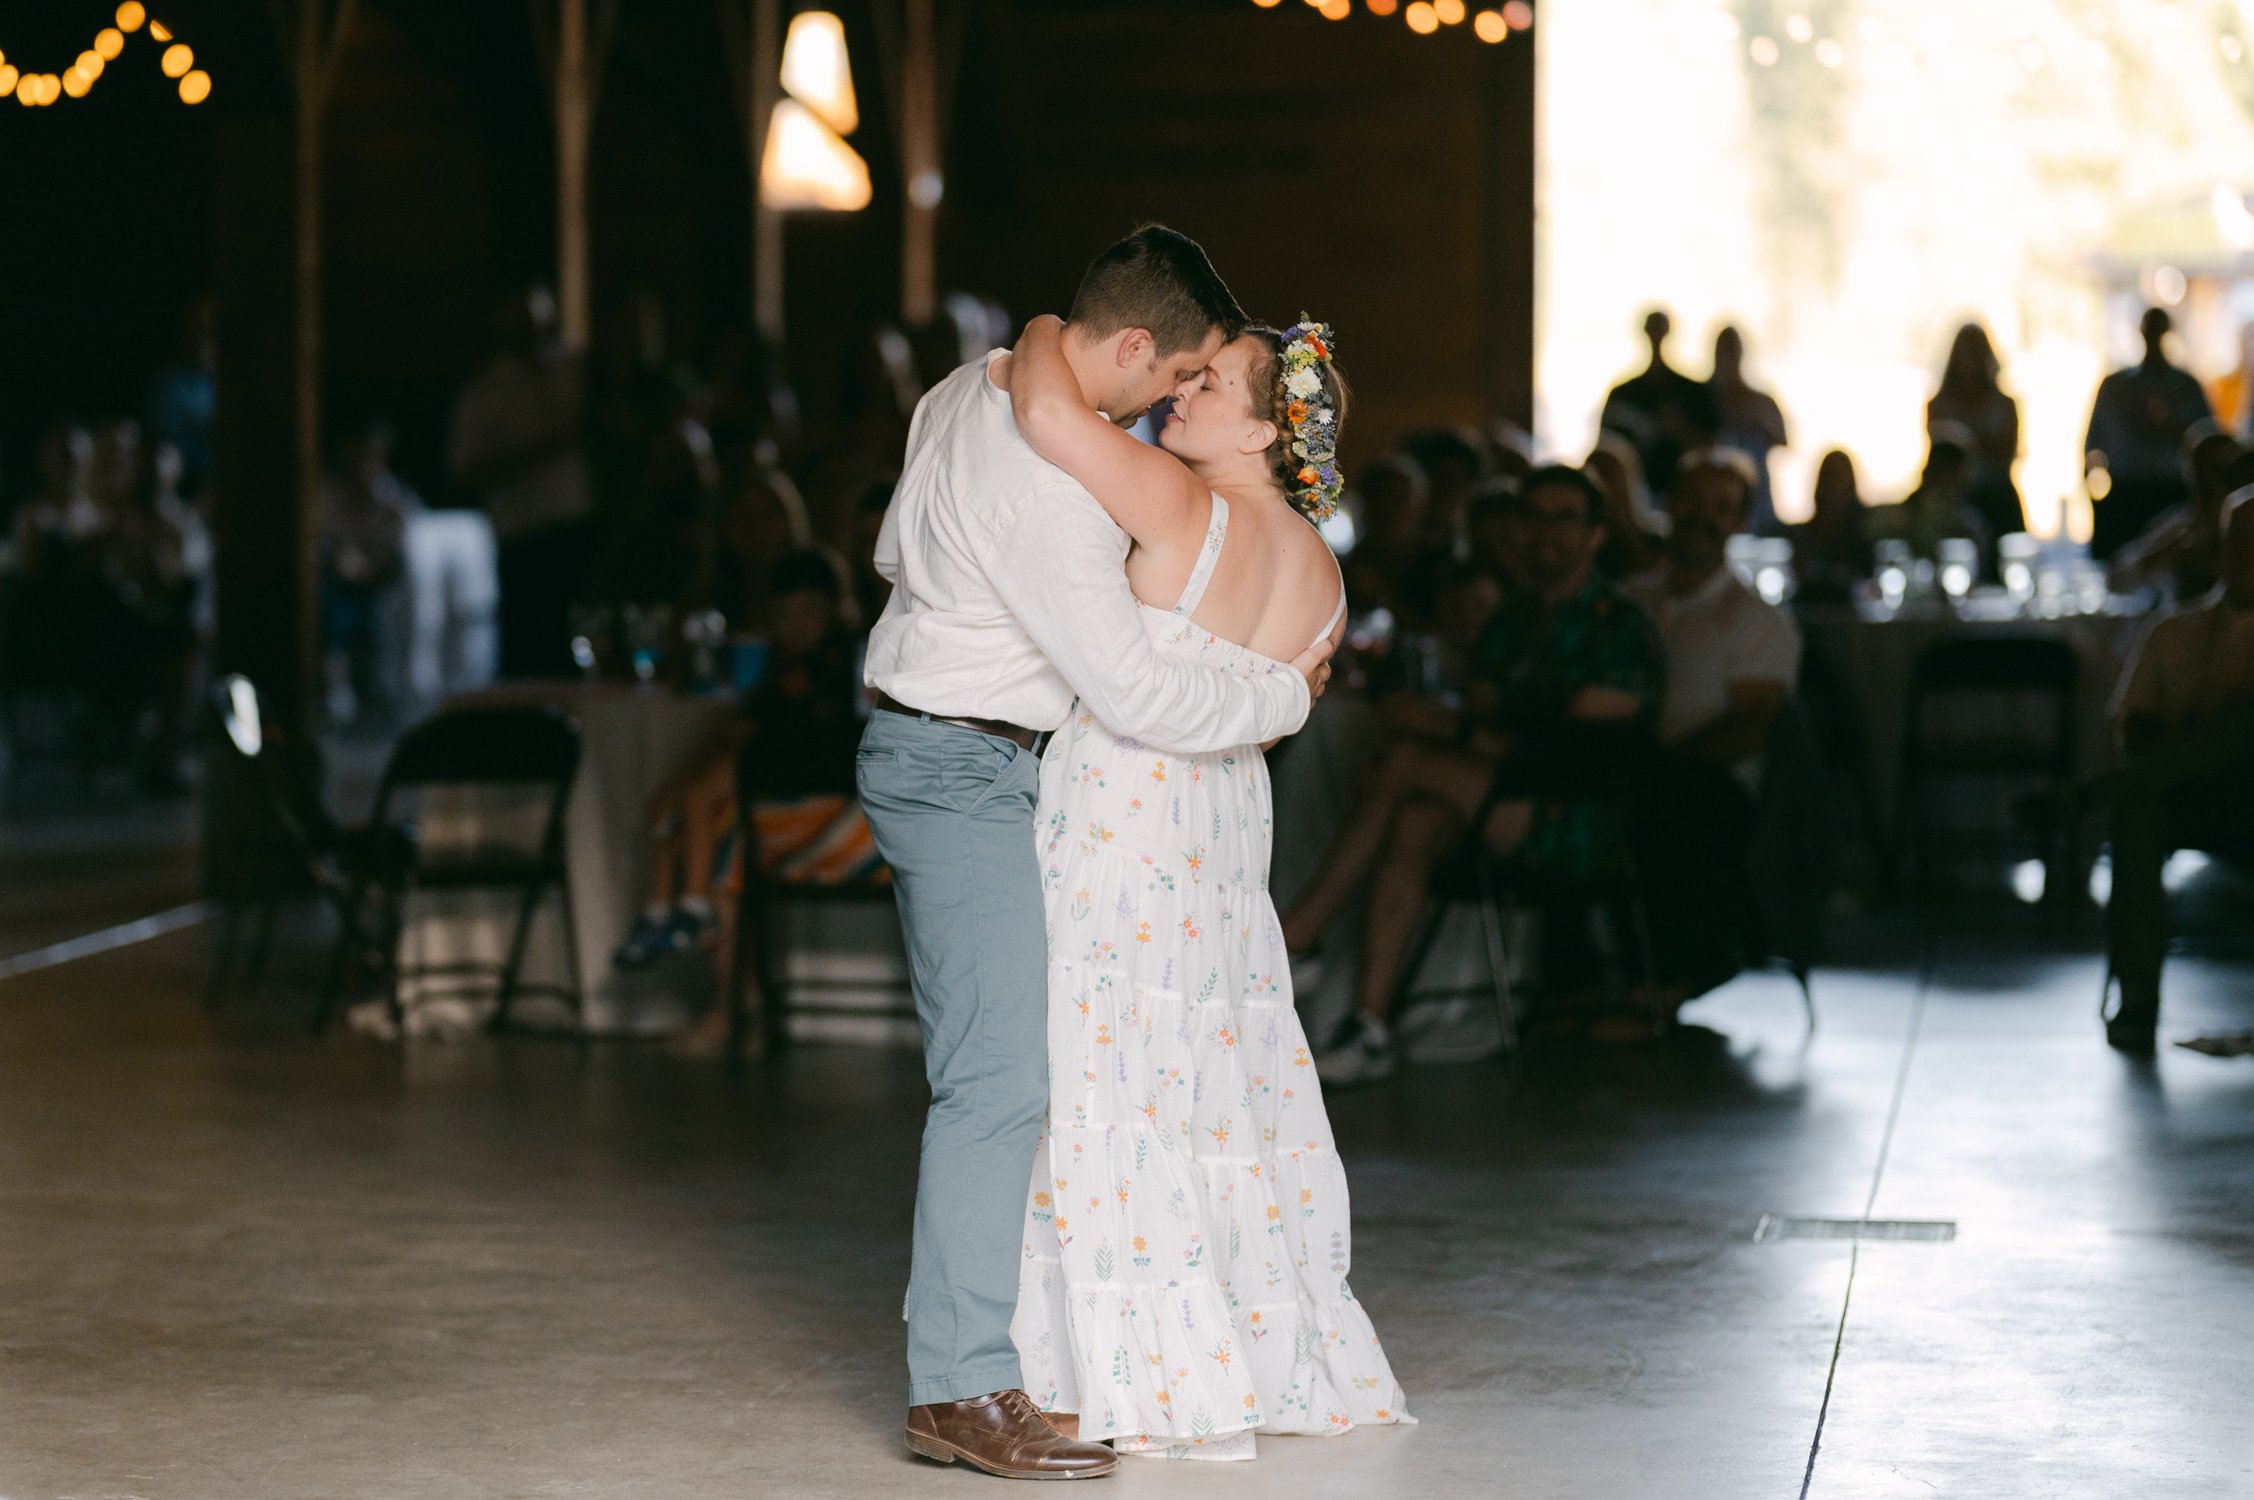 graeagle corner barn wedding, photo of the newlywed couple during their first dance